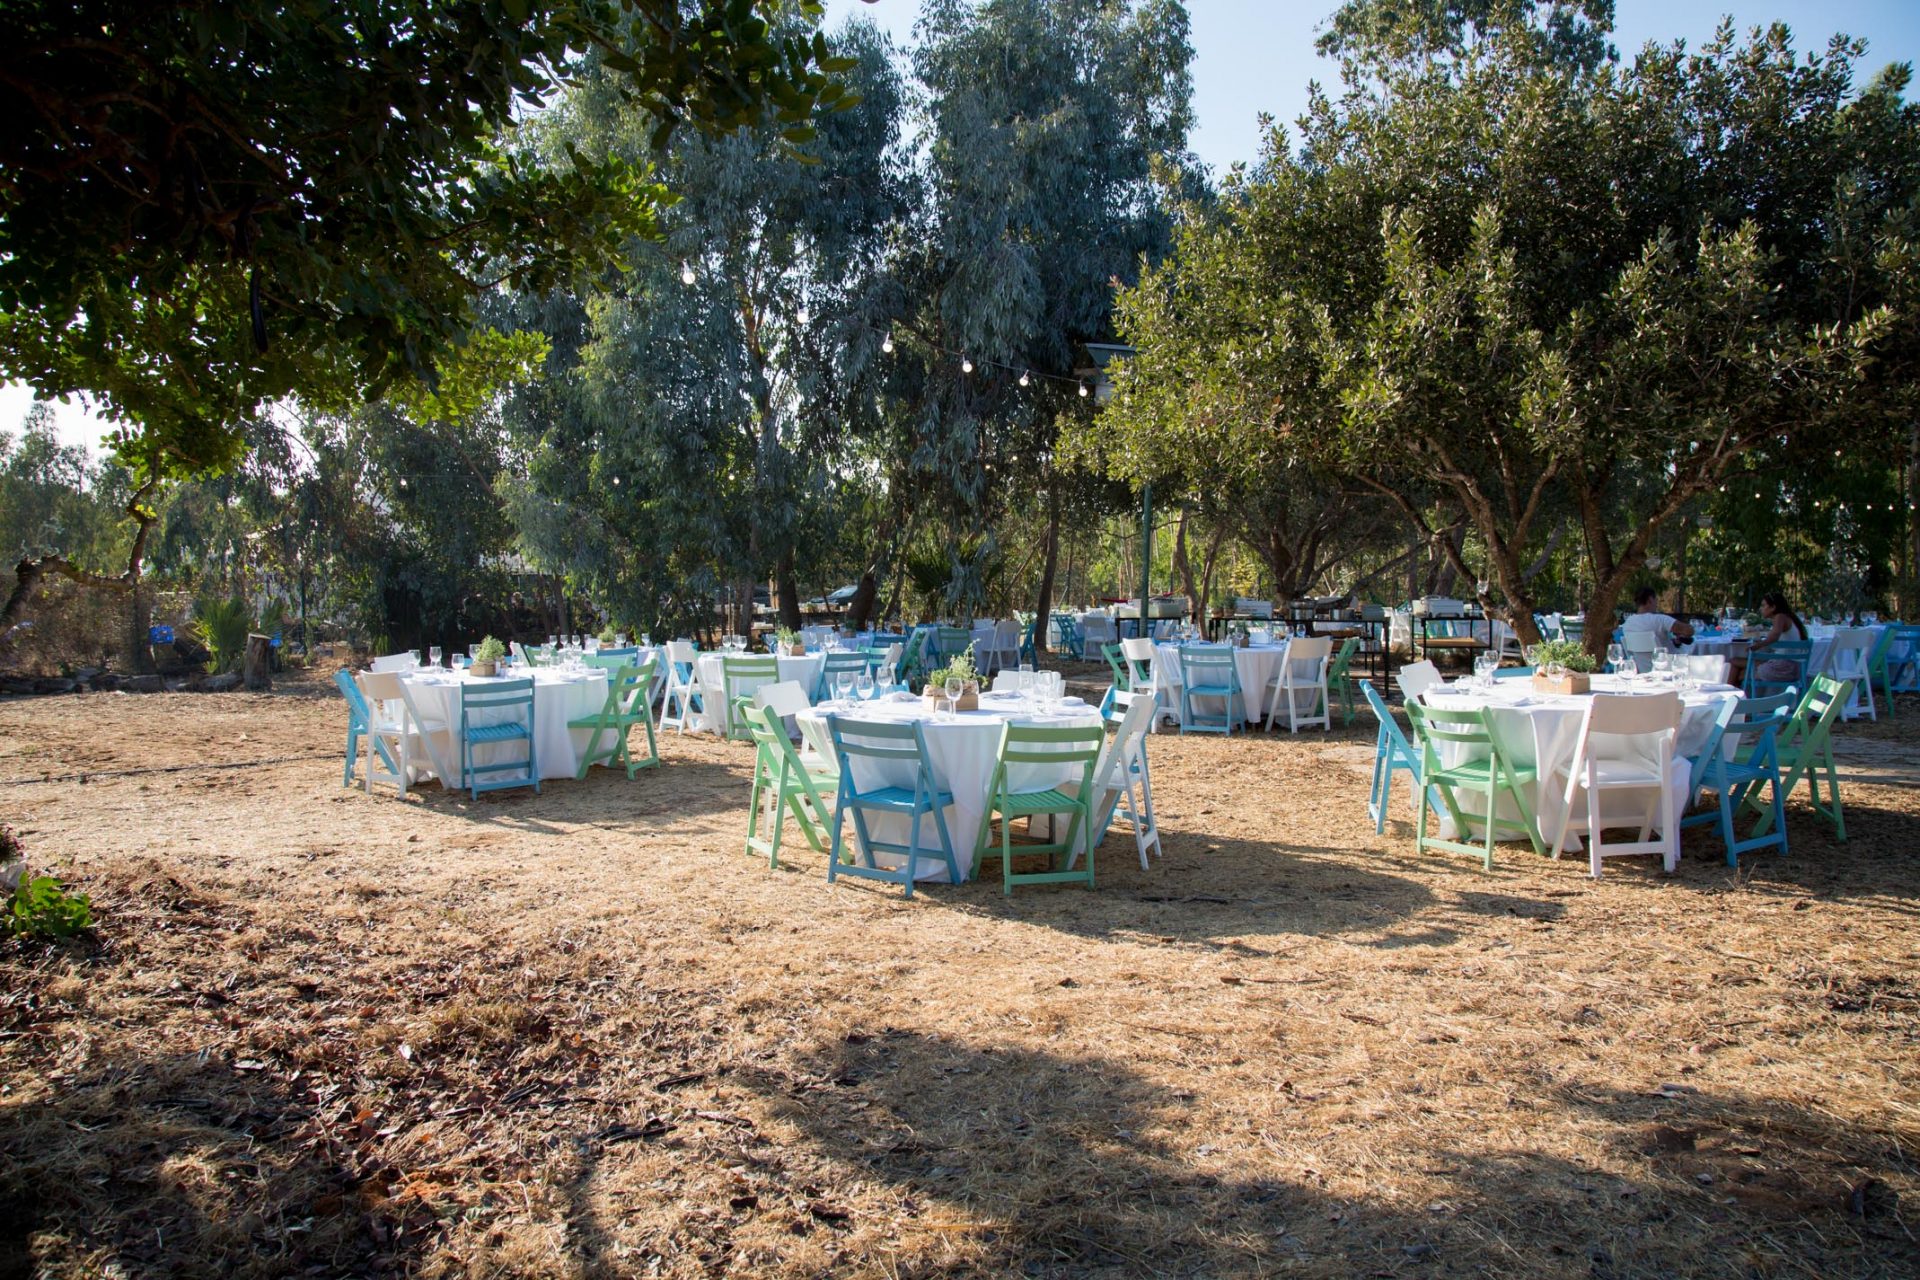 A wedding in the family yard